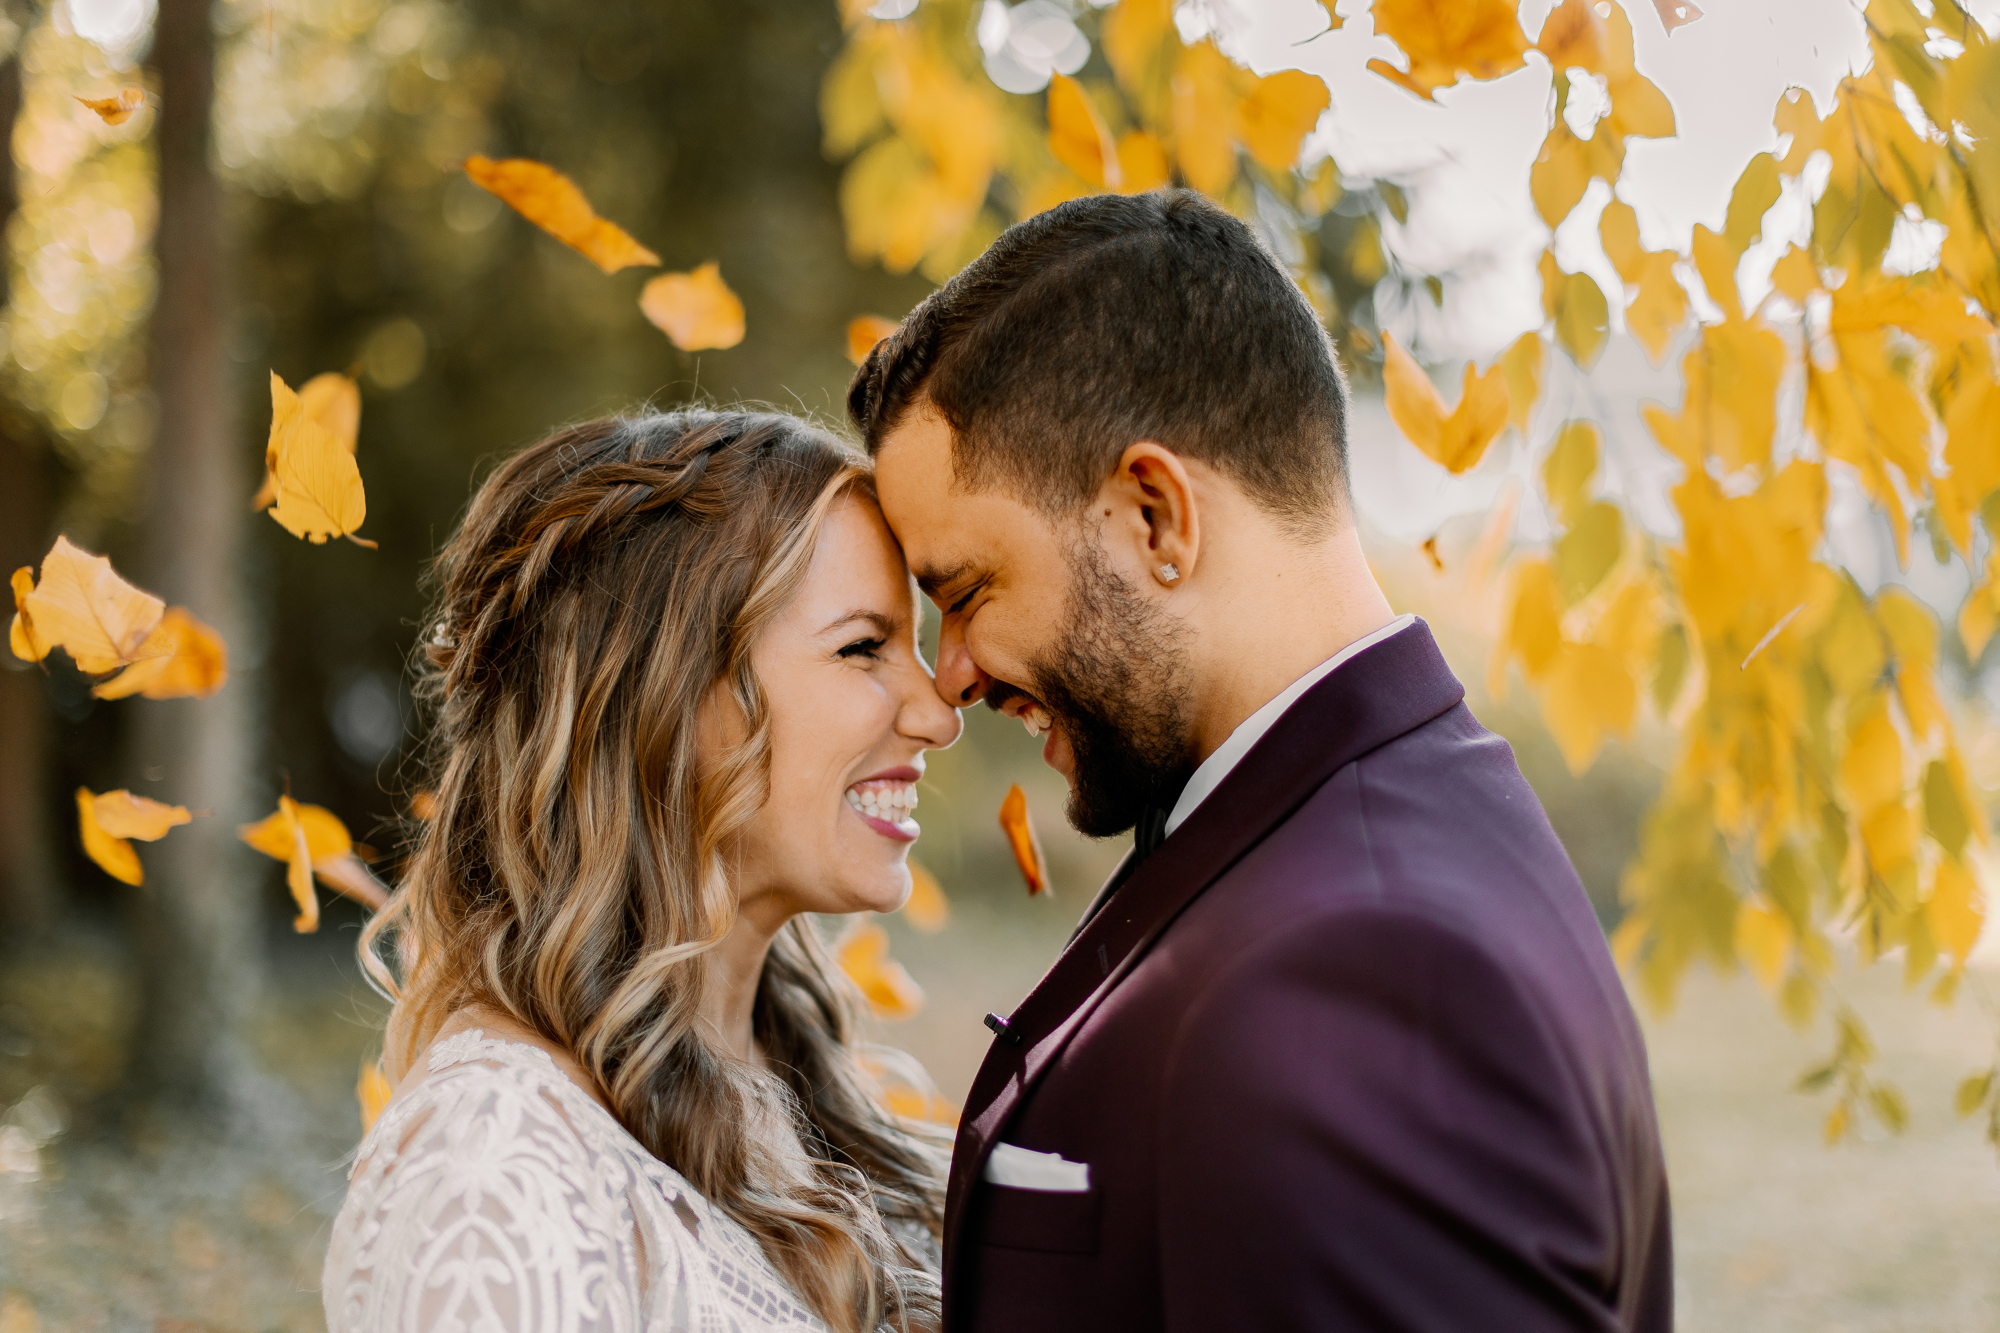 NYC Micro-Wedding Planning in the fall with orange leaves